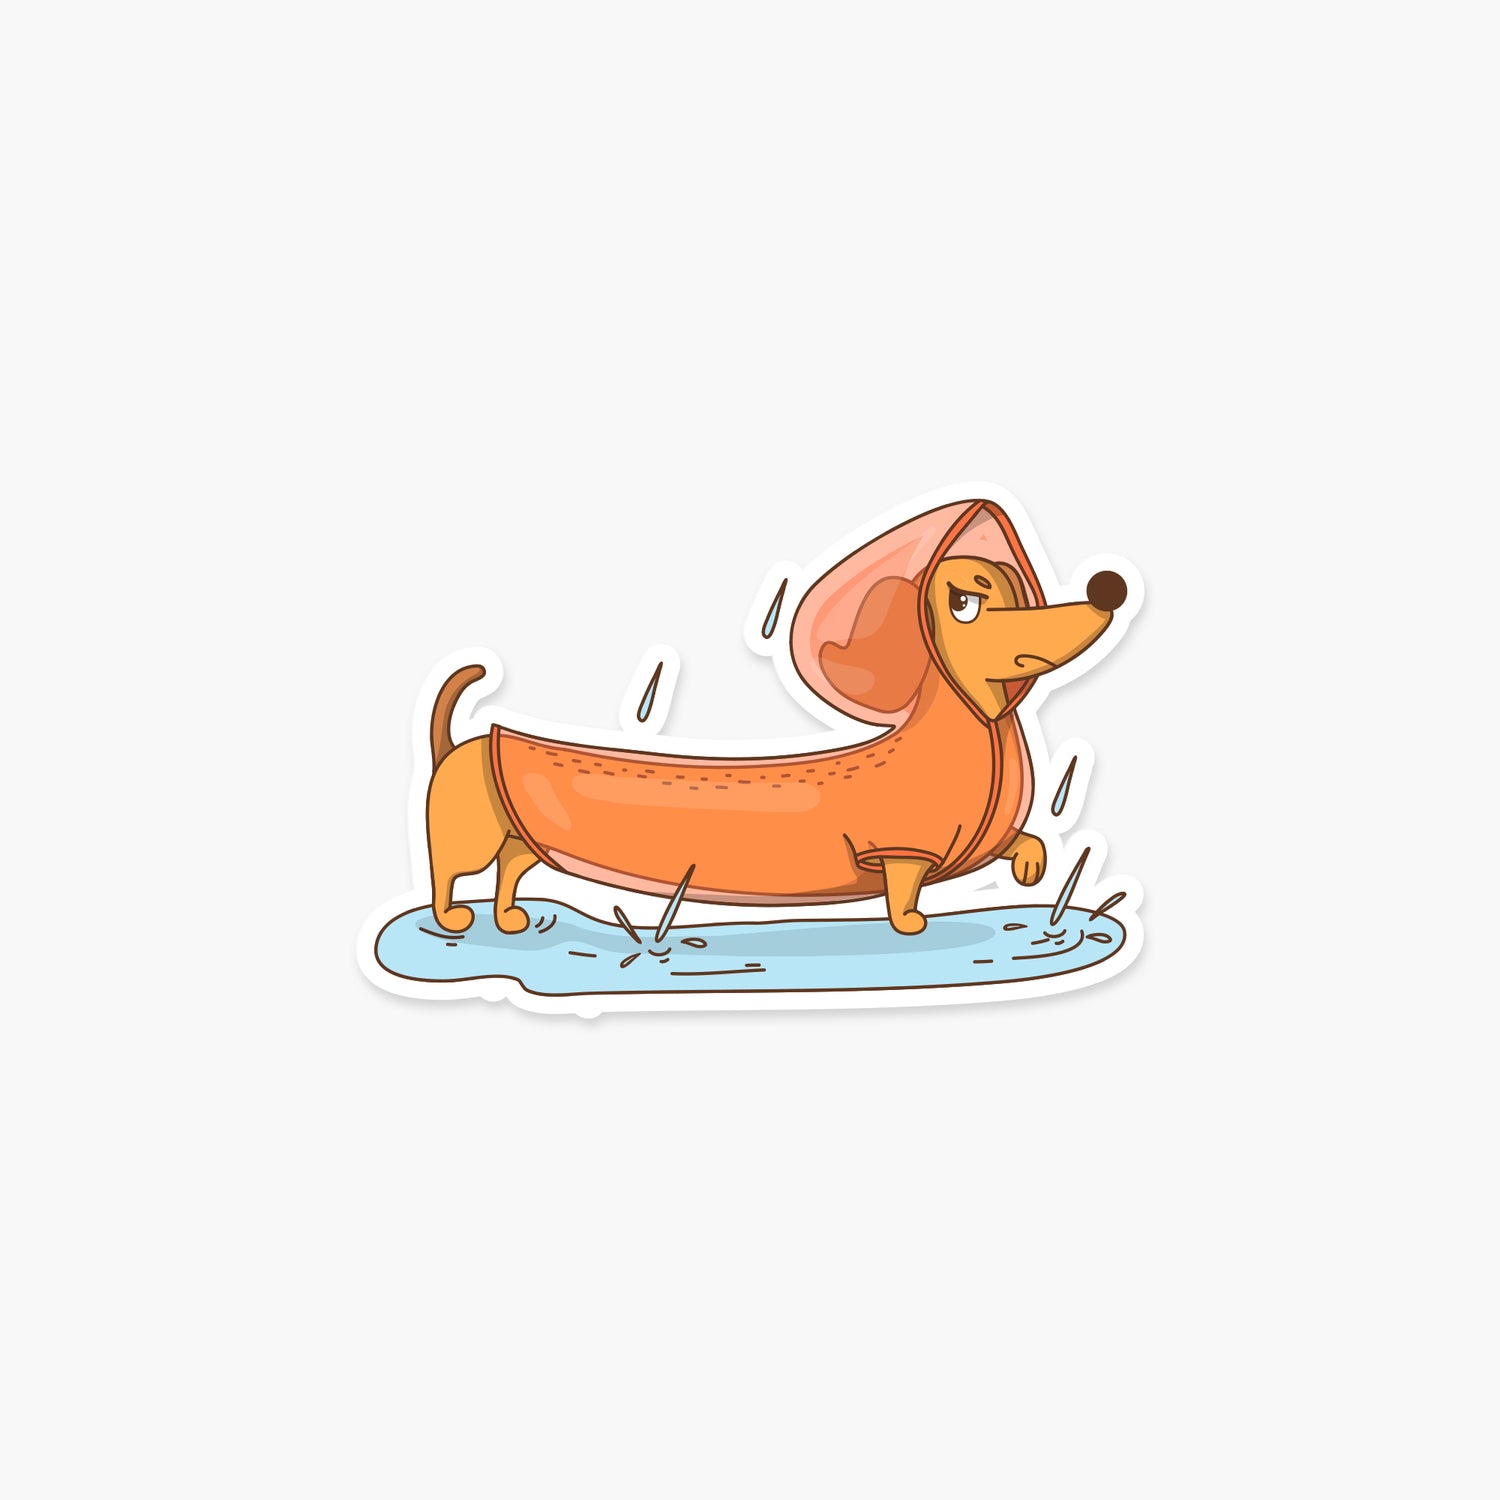 Disgruntled Dachshund Dog in a Raincoat - Animal Sticker | Footnotes Paper